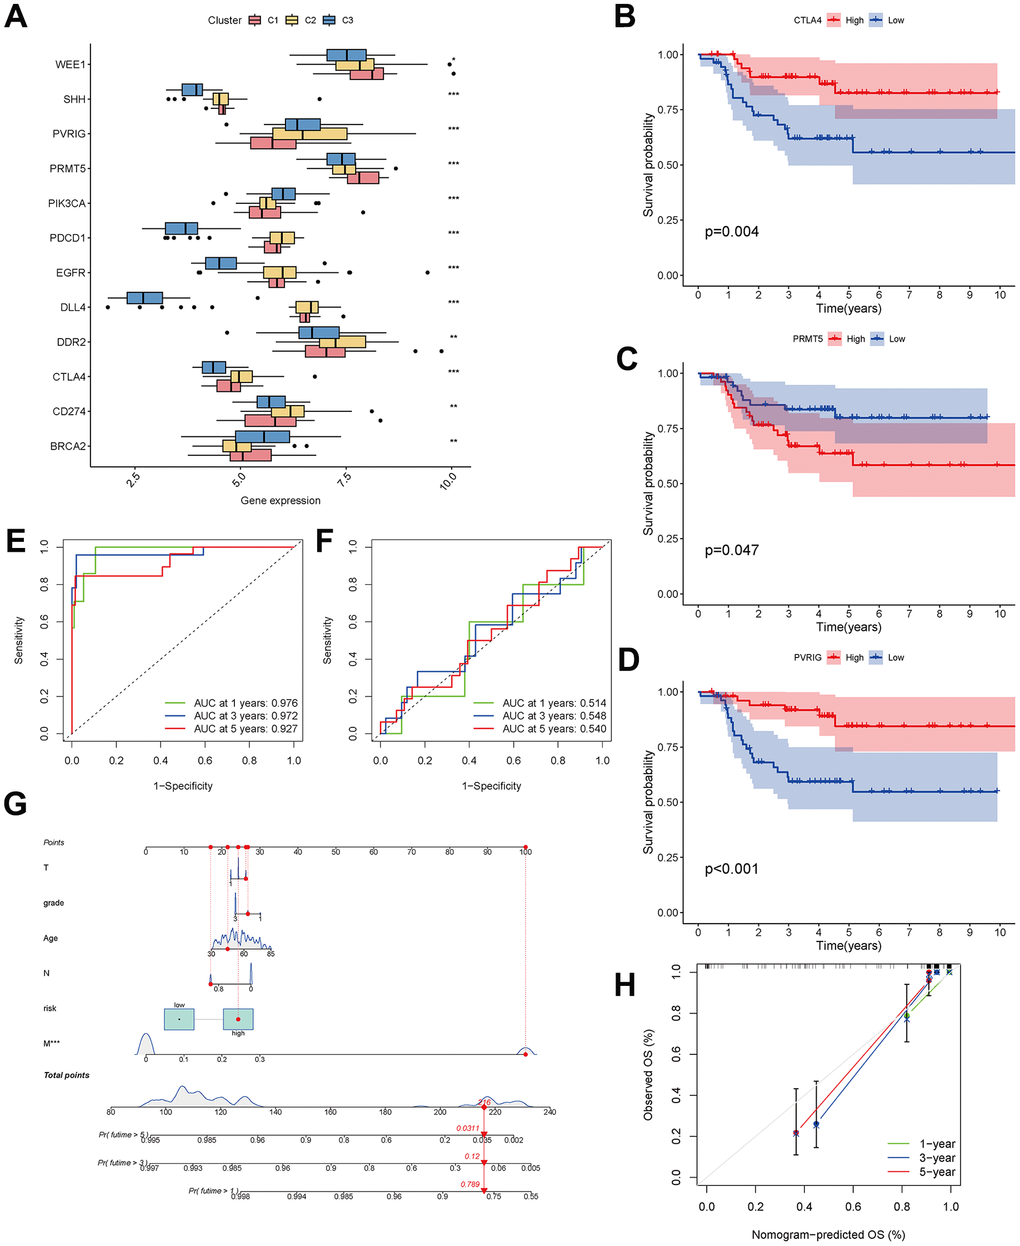 Analysis of CAF-related genes between molecular subtypes. (A) The expression of immune checkpoint-related genes among clusters. (B–D) The expression of checkpoint-related genes associated with survival in triple-negative breast cancer patients. (E, F) ROC curves for the training and testing sets. (G) Nomogram predicting patient survival prognosis. (H) Calibration curve of the nomogram.